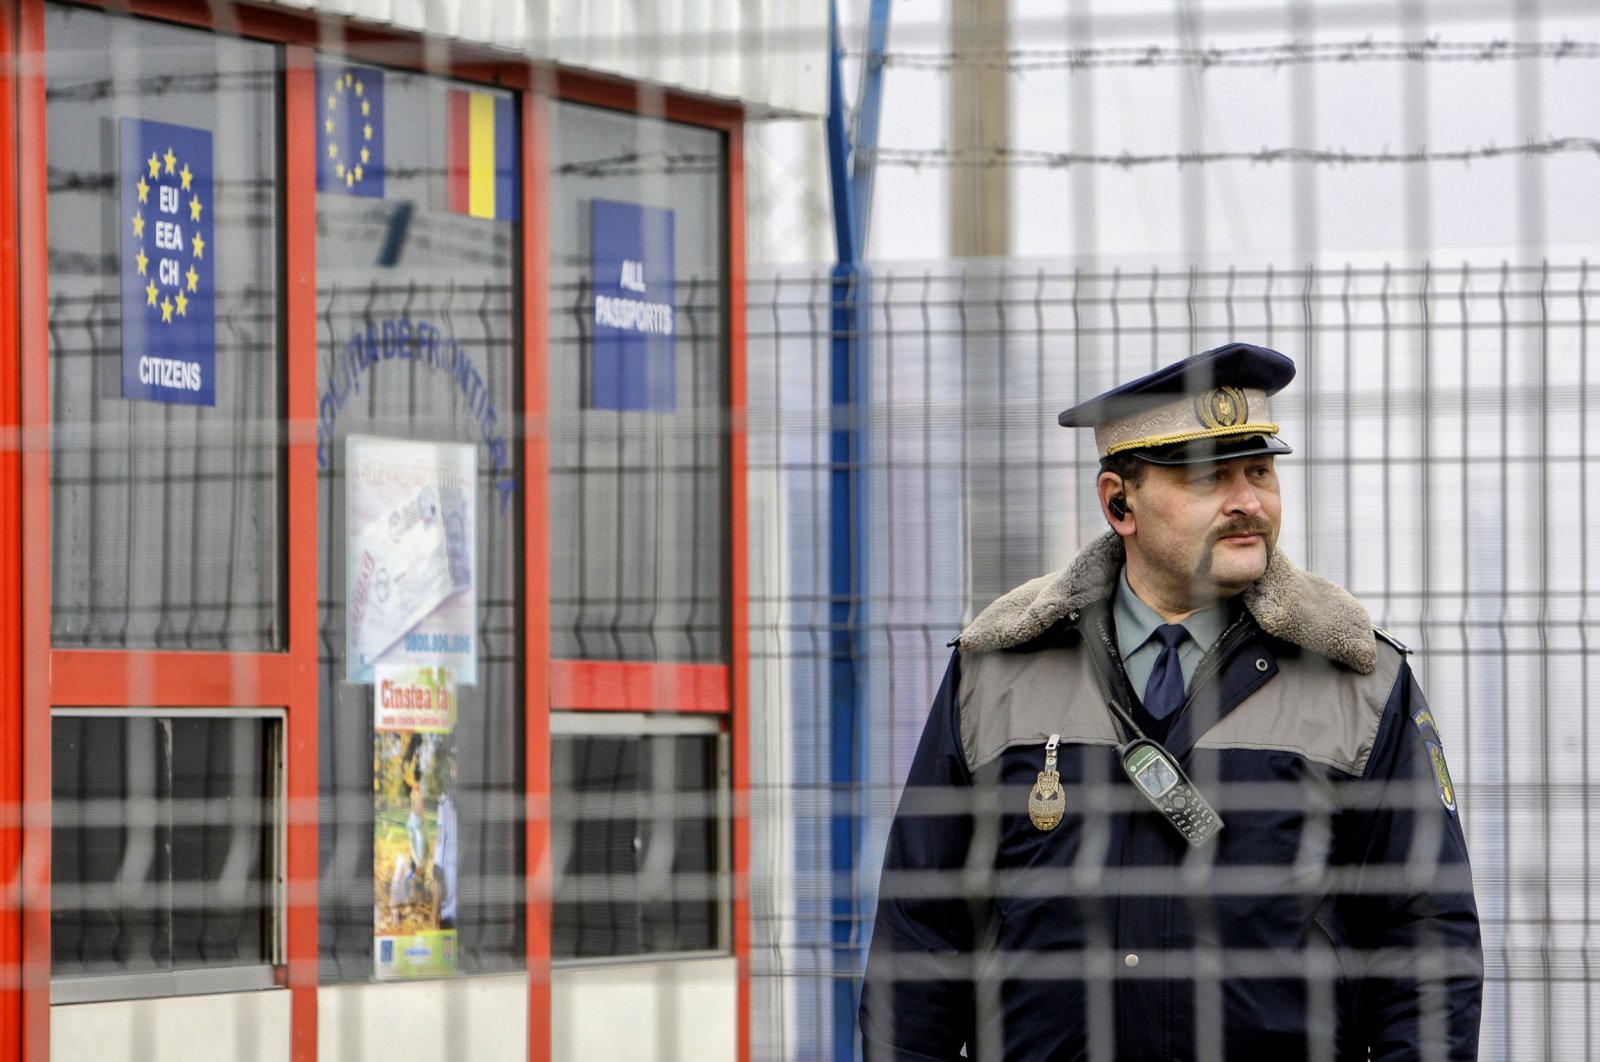 A Romanian border police officer stands guard at the railway border crossing point between Romania and Moldova in Ungheni, Romania, Jan. 18, 2011. (AP Photo)